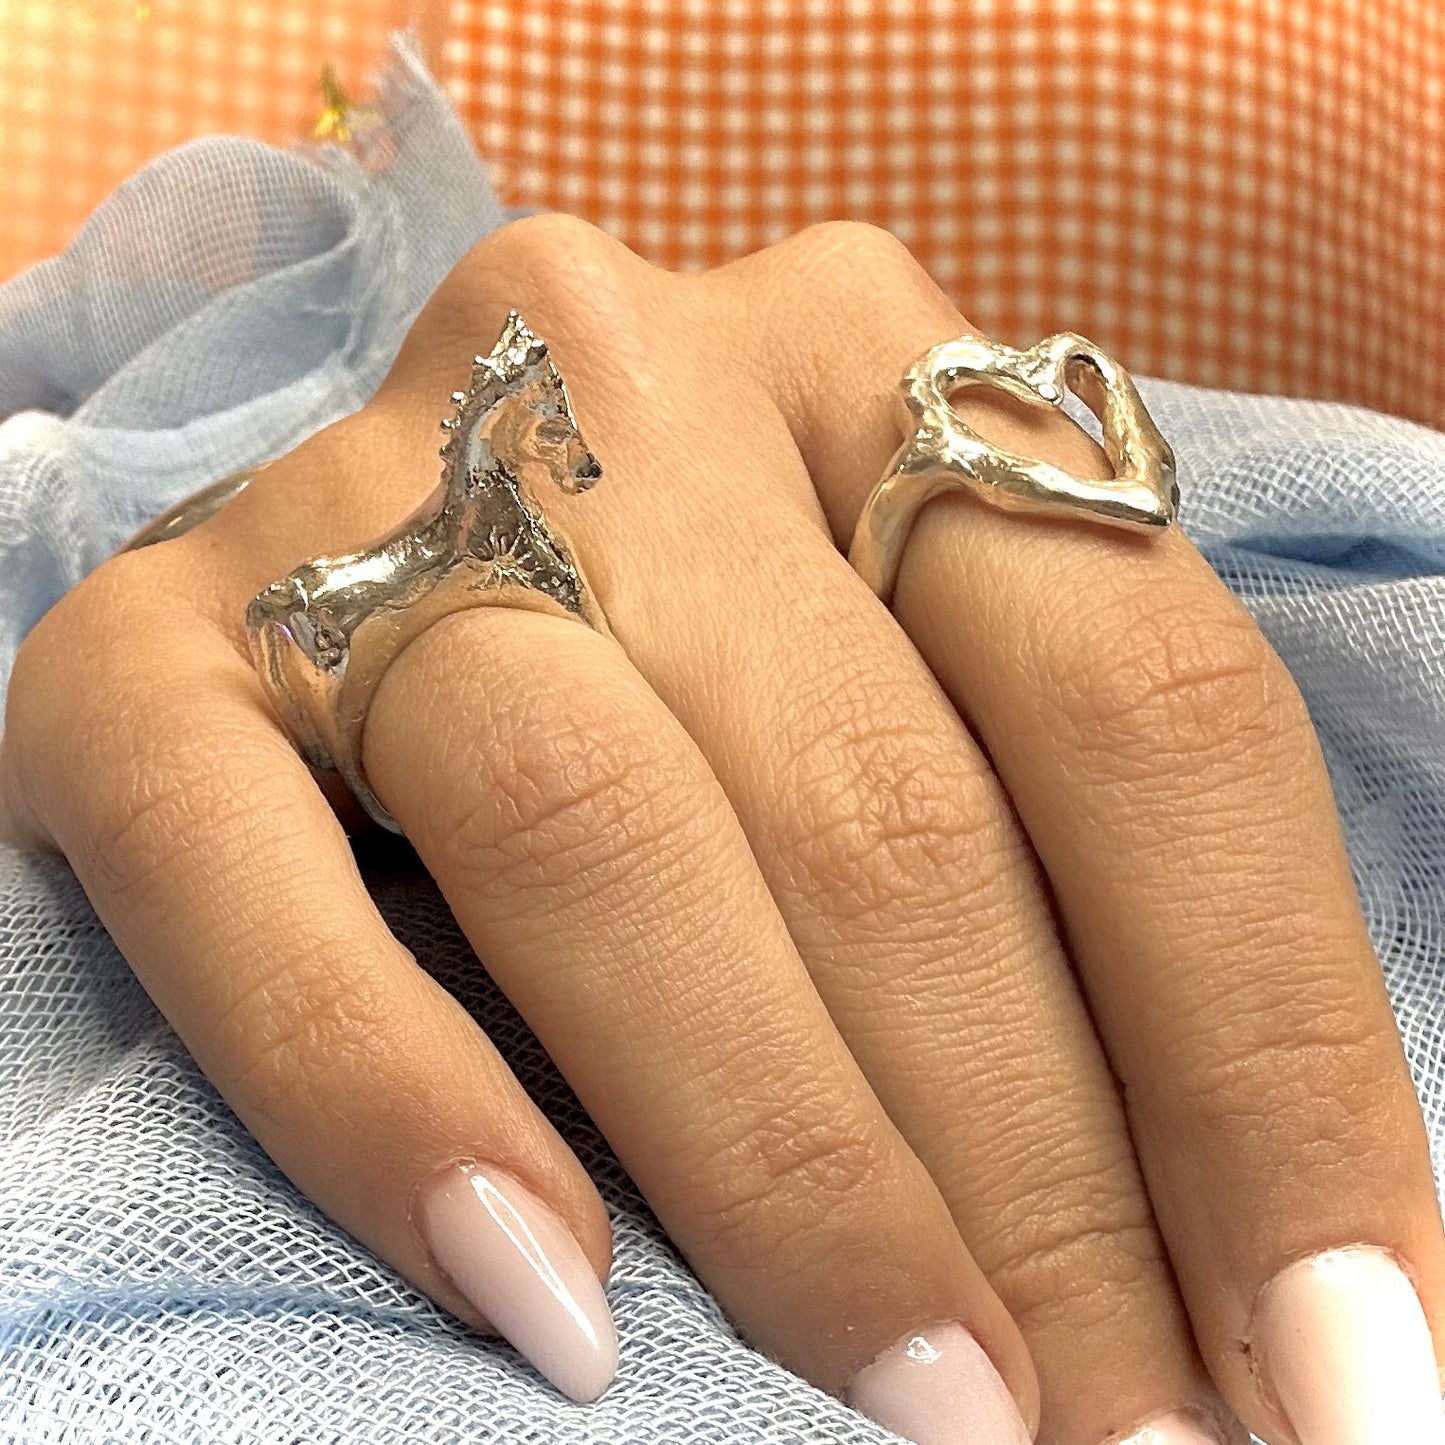 SILVER HORSE RING ‘’R200SS’’